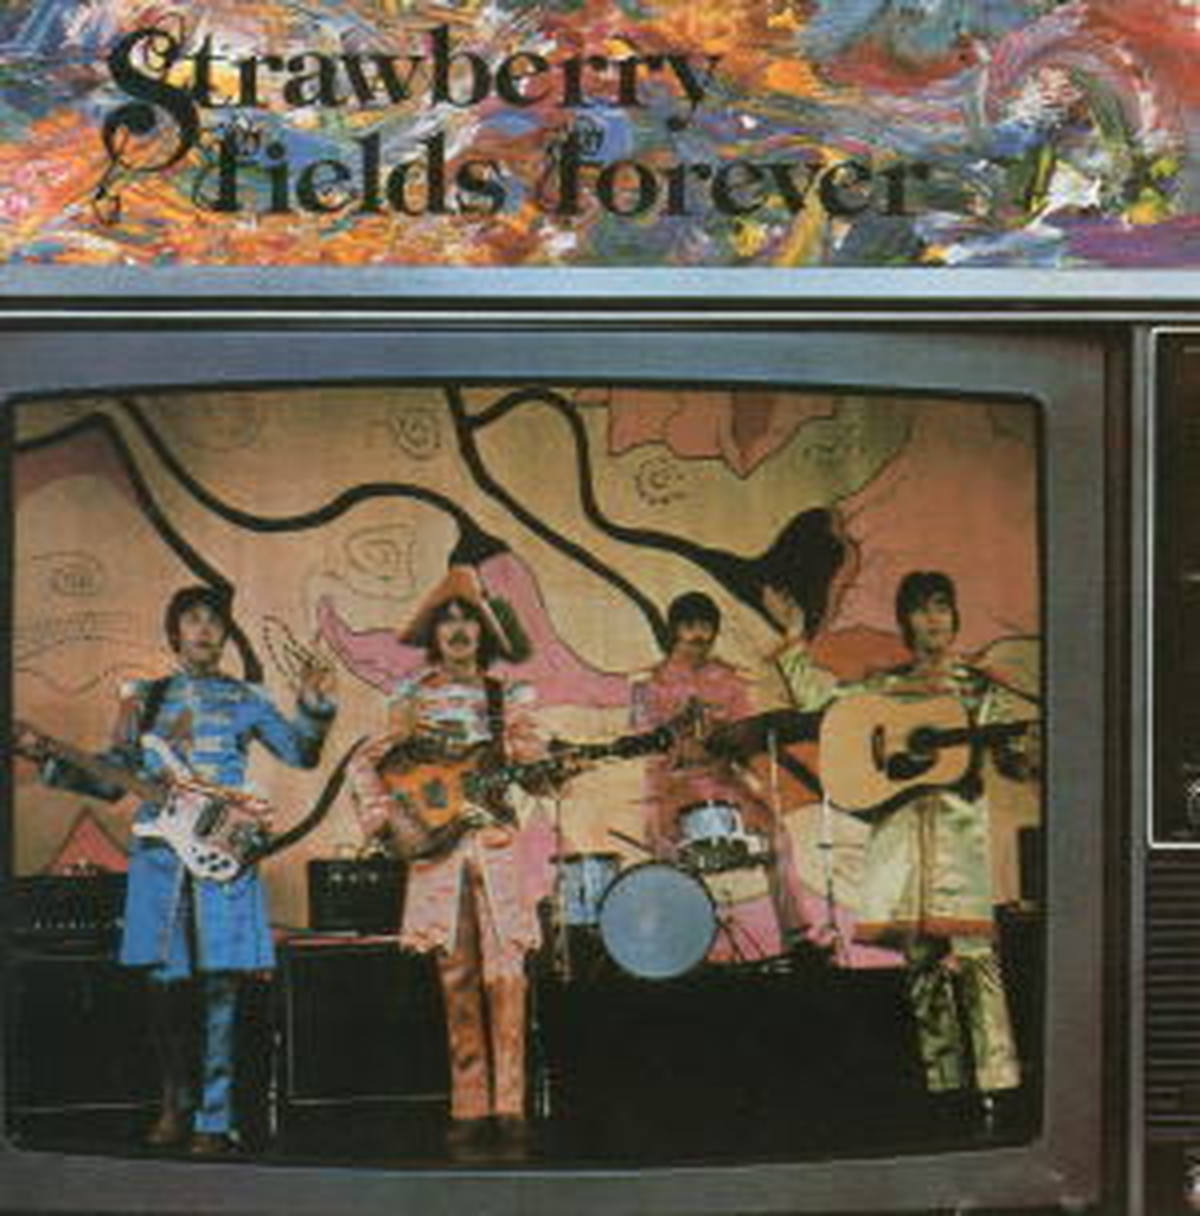 THE BEATLES / Strawberry Fields Forever | CD shop Bluebird Records